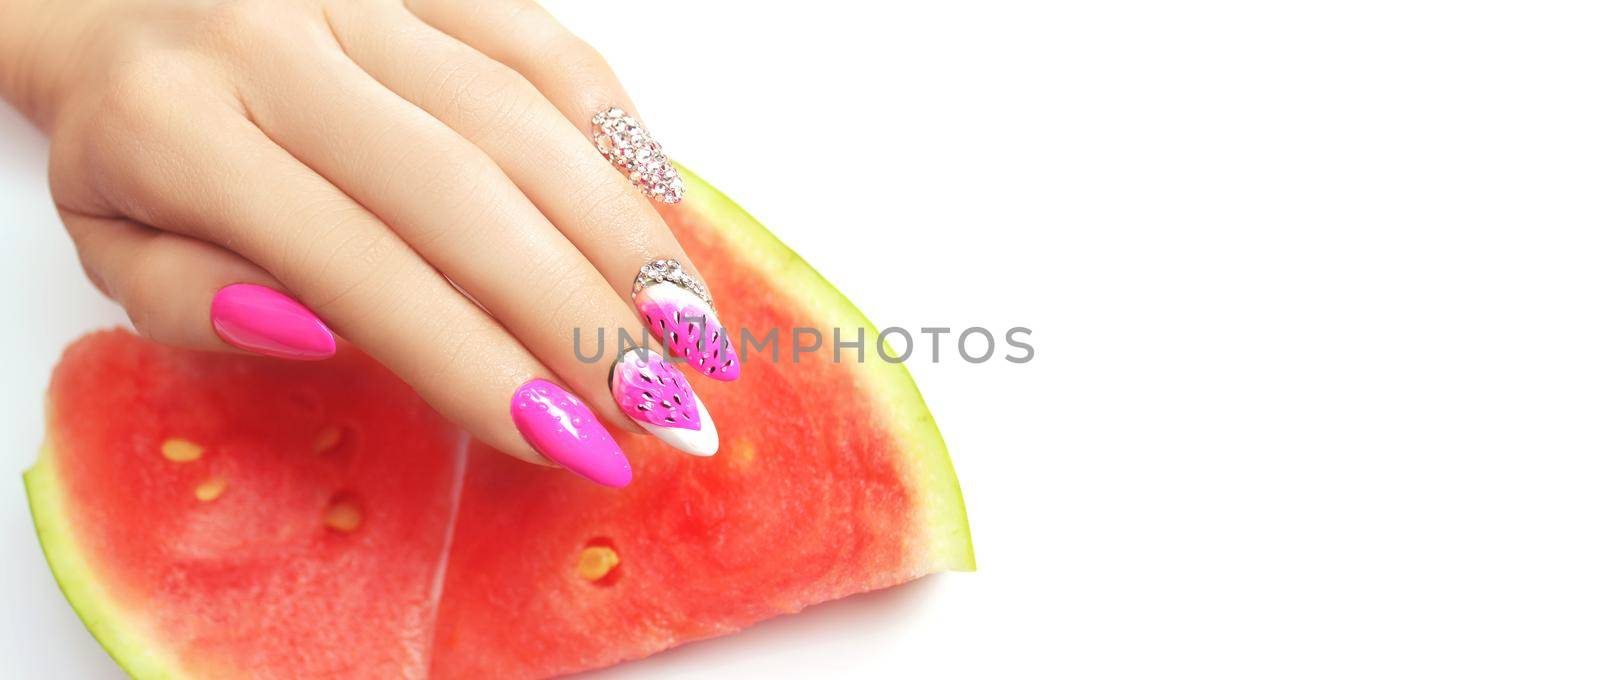 Hand with fashion manicure holding watermelon on white background. by Taut